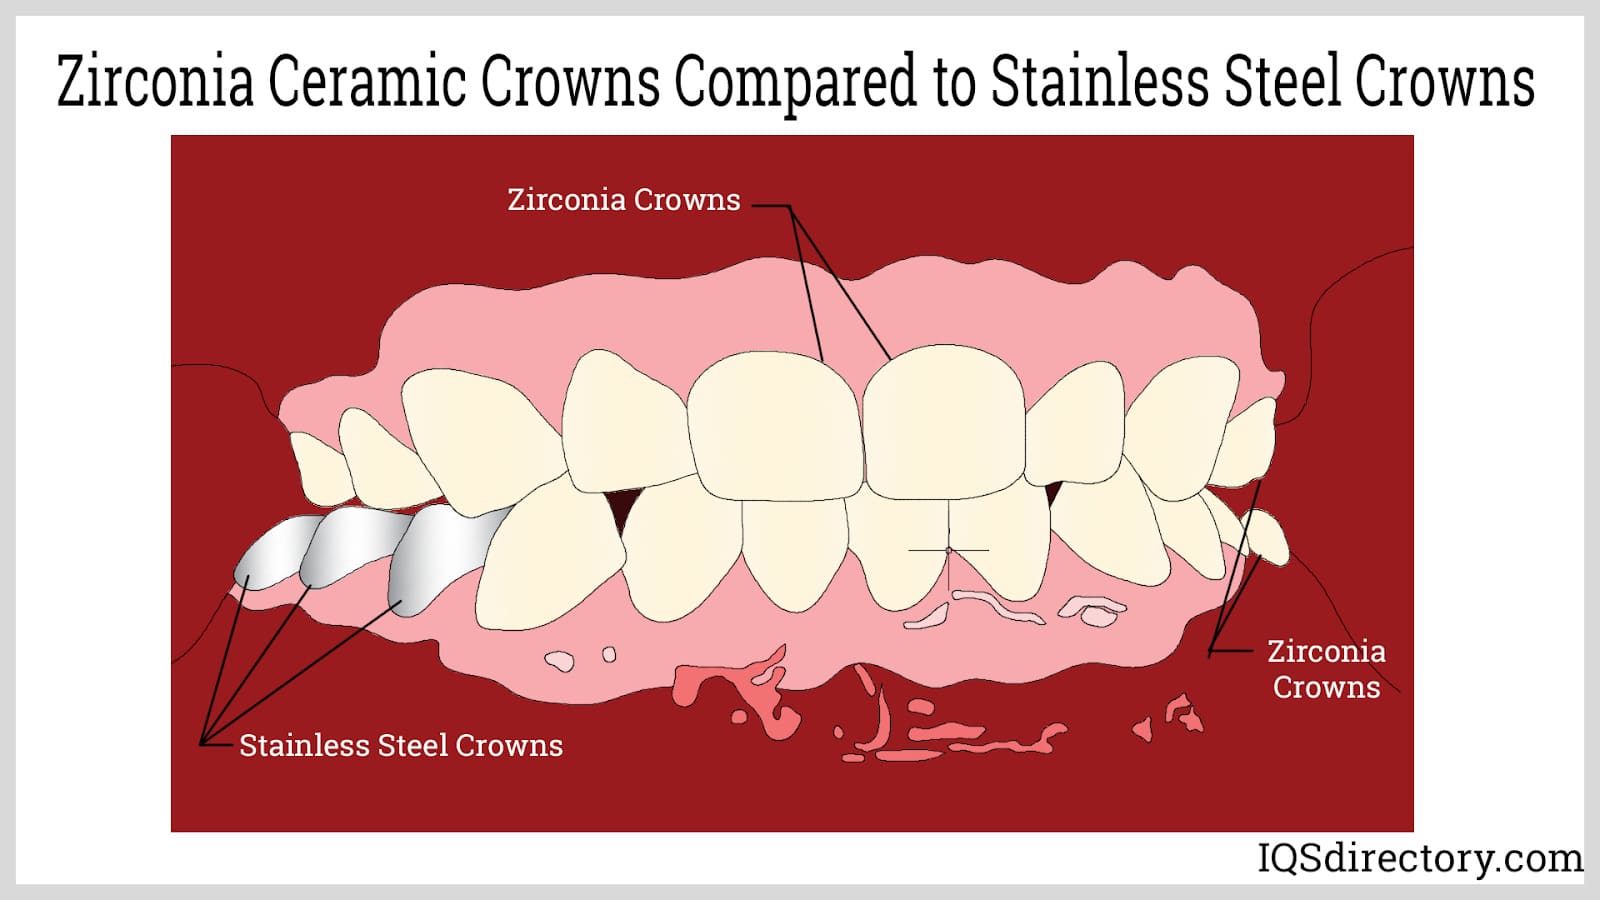 Zirconia Ceramic Crowns Compared to Stainless Steel Crowns